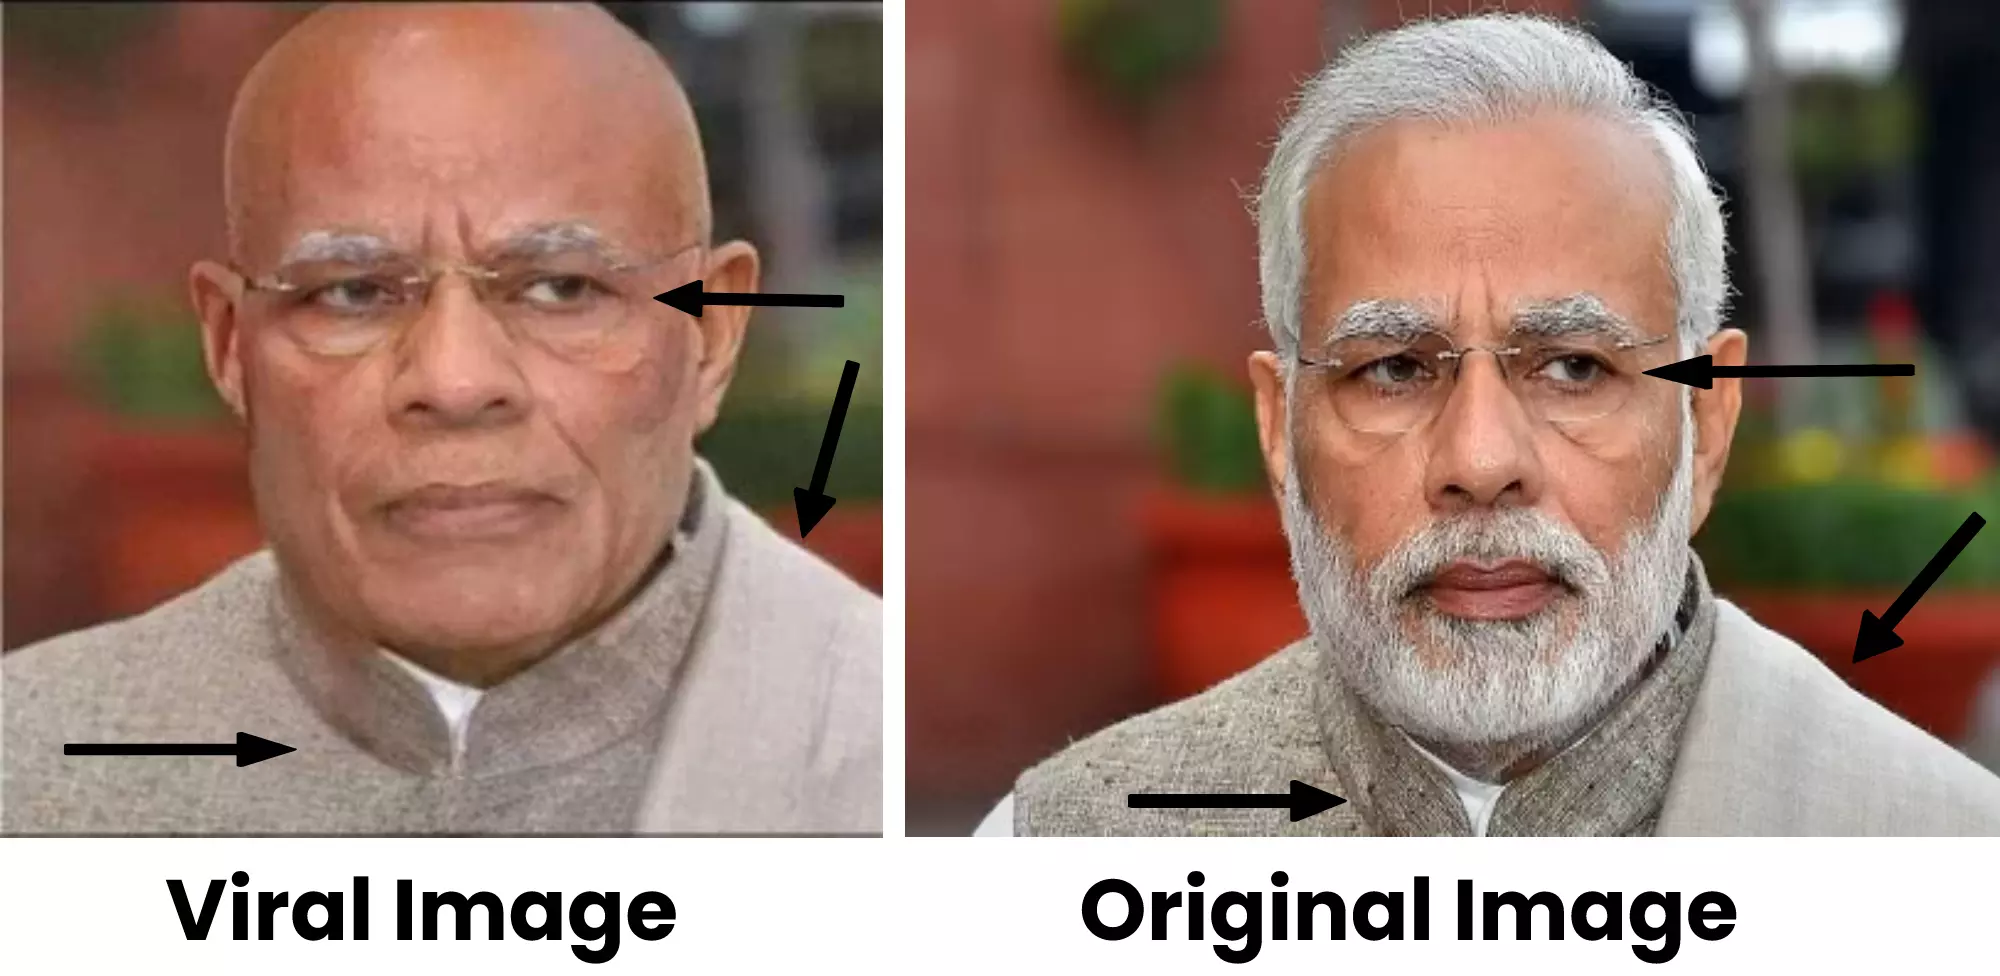 Photo Of PM Modi With Shaved Head Following Mother's Demise Is Morphed